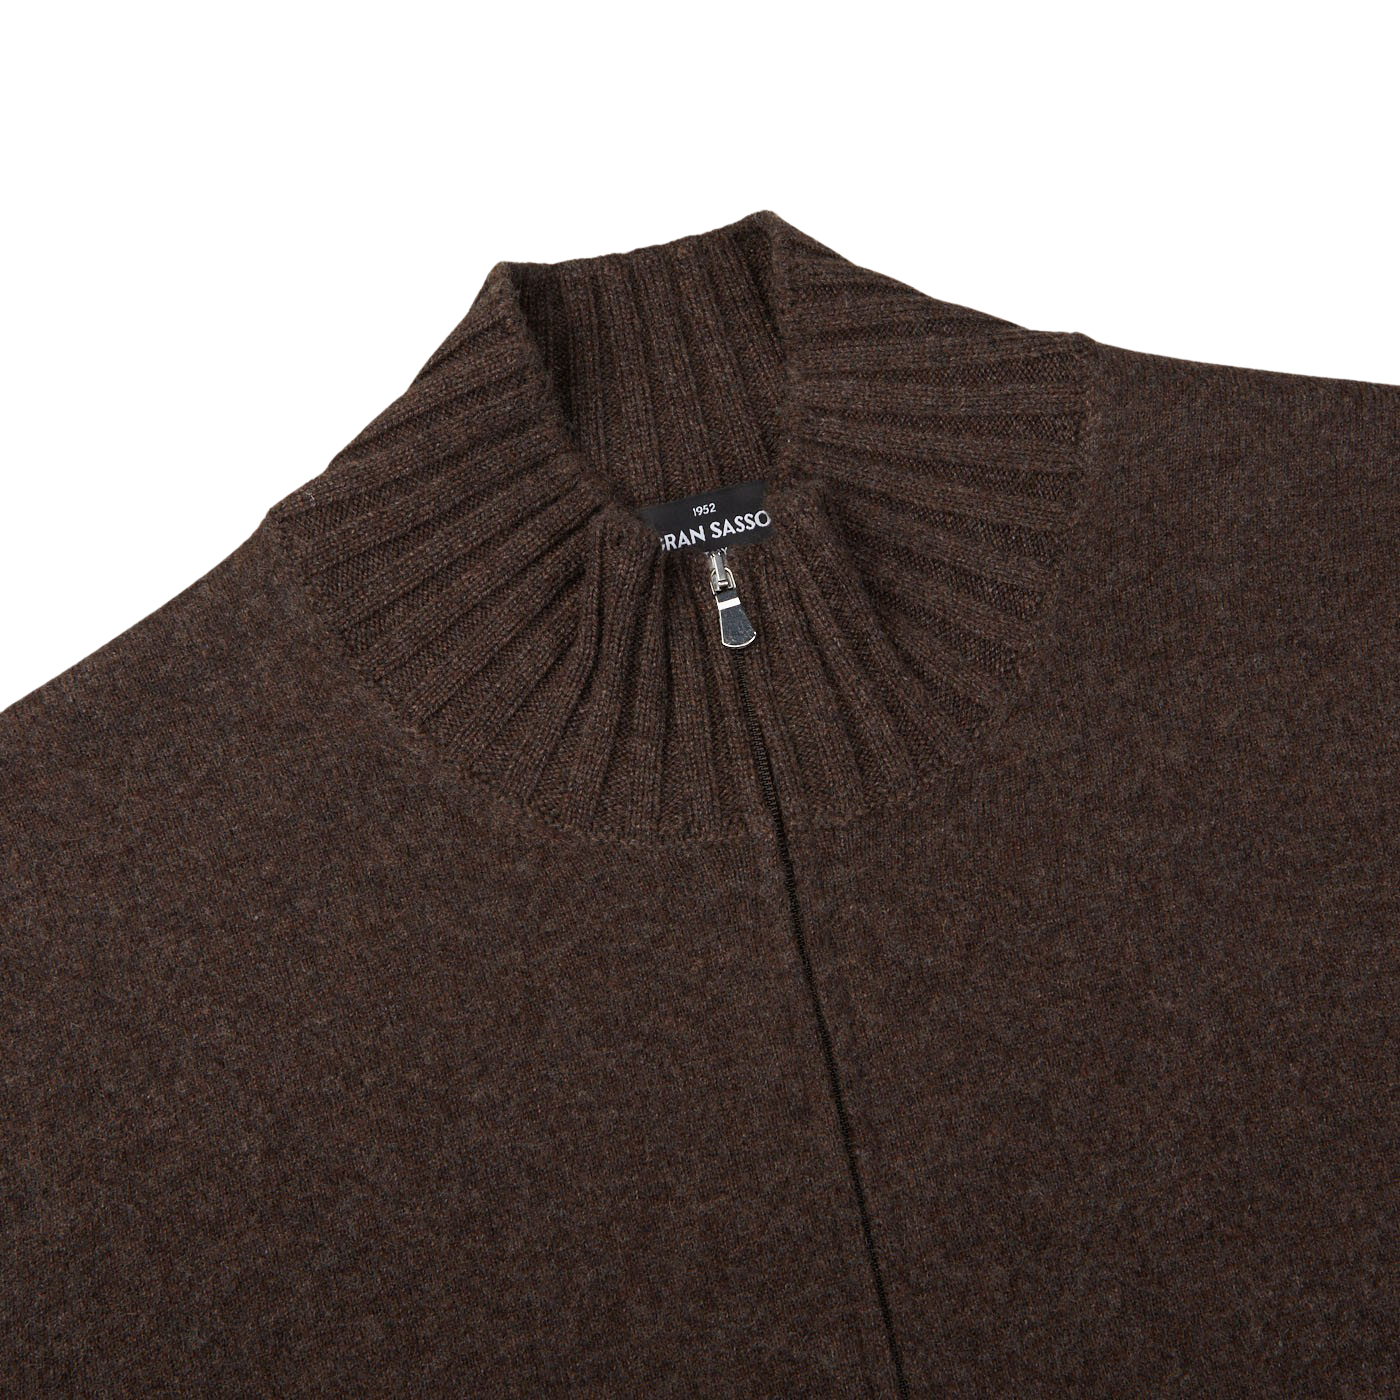 A Gran Sasso Dark Brown Felted Cashmere Zip Cardigan with a zipper on the front.